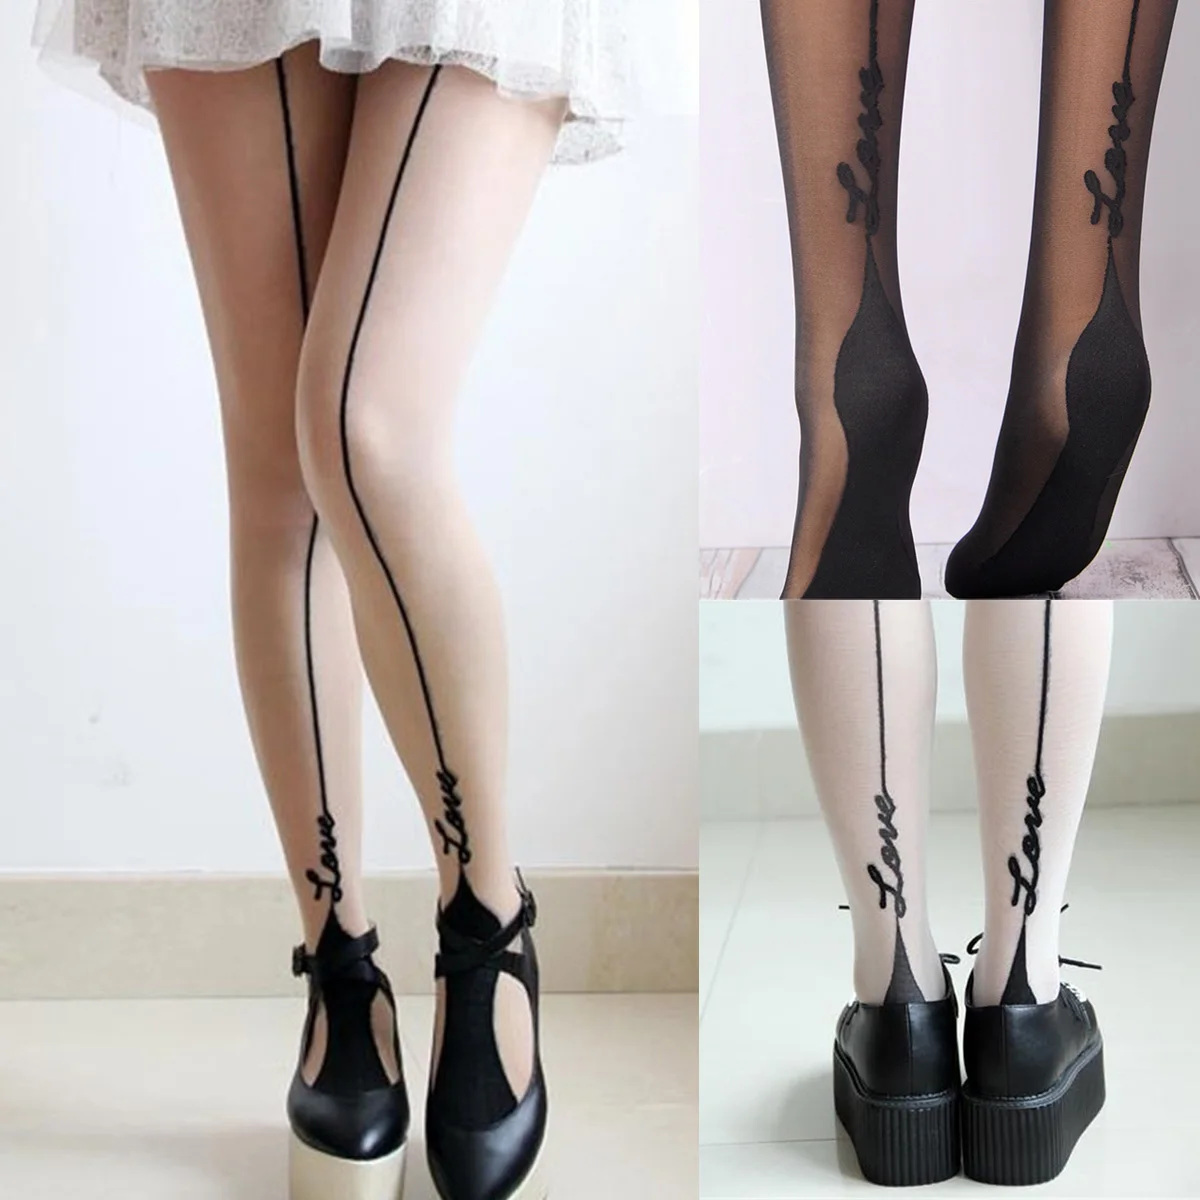 Winter Summer Club Pantyhose Letter Printed Stockings Women Open Crotch Tights Collant Femme Sexy Tights Medias De Mujer